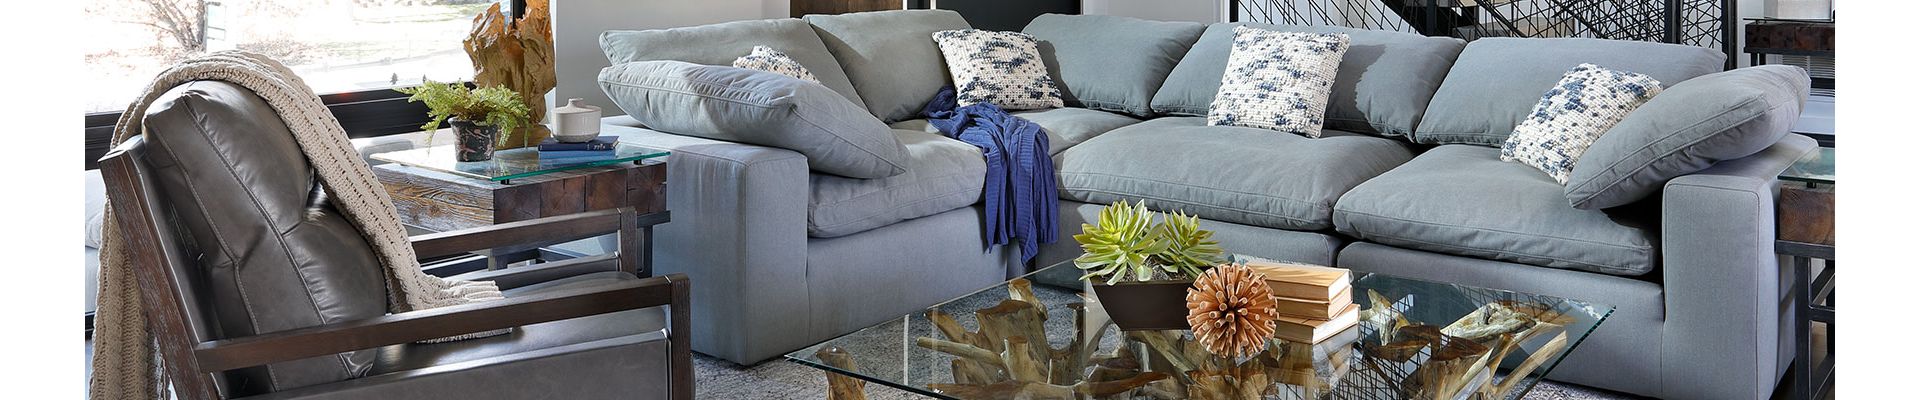 Shop Upholstery Furniture